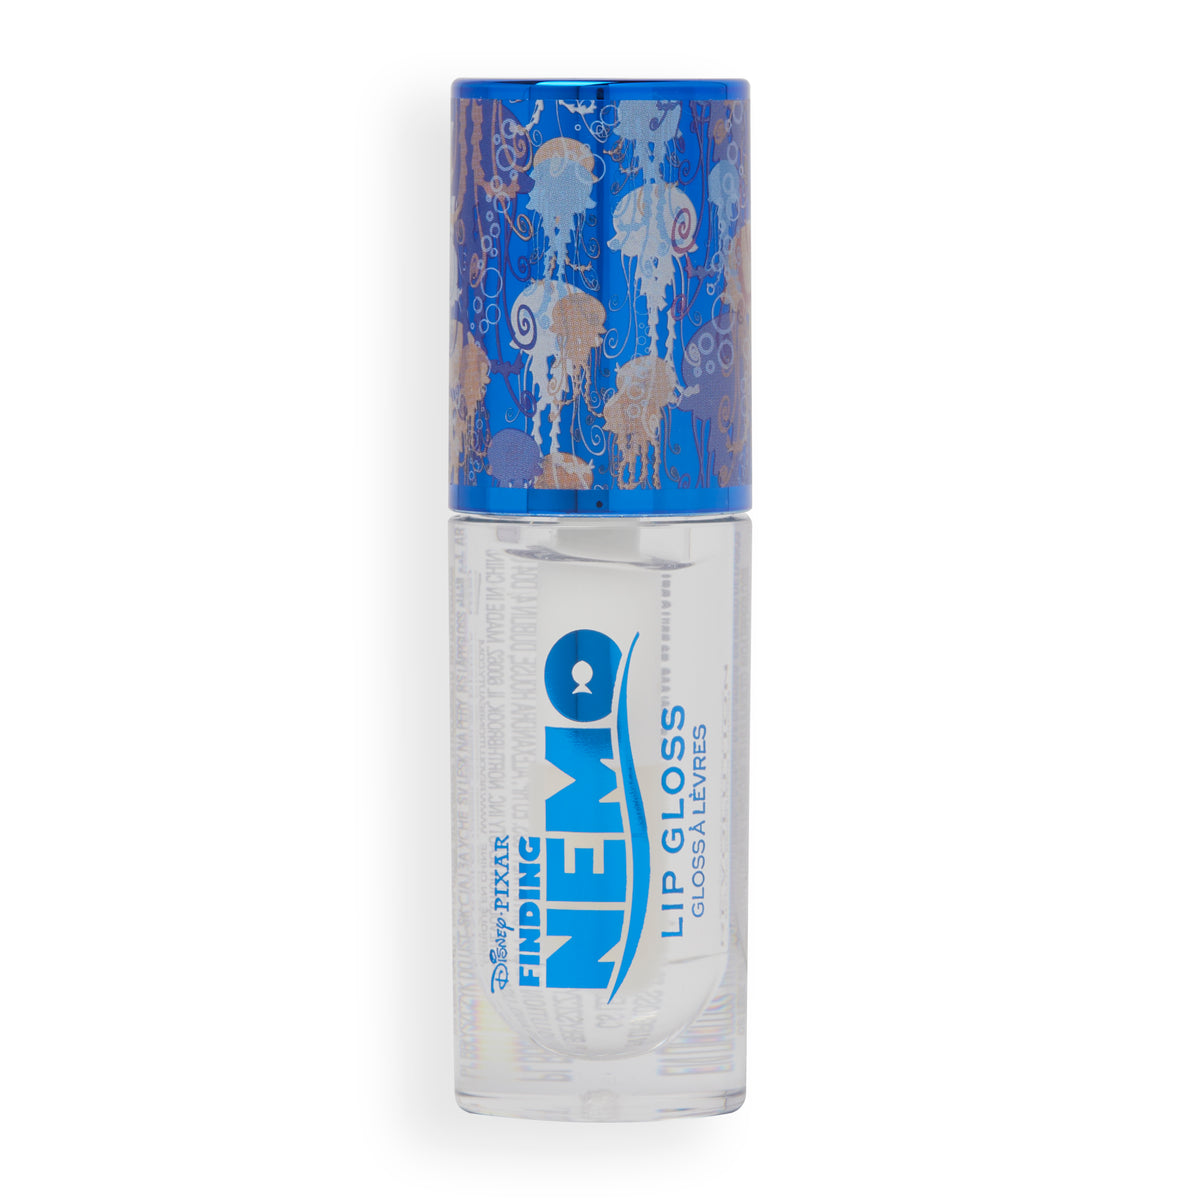 DISNEY PIXAR’S FINDING NEMO AND REVOLUTION NEMO CLEAR LIP GLOSS - OUTLET